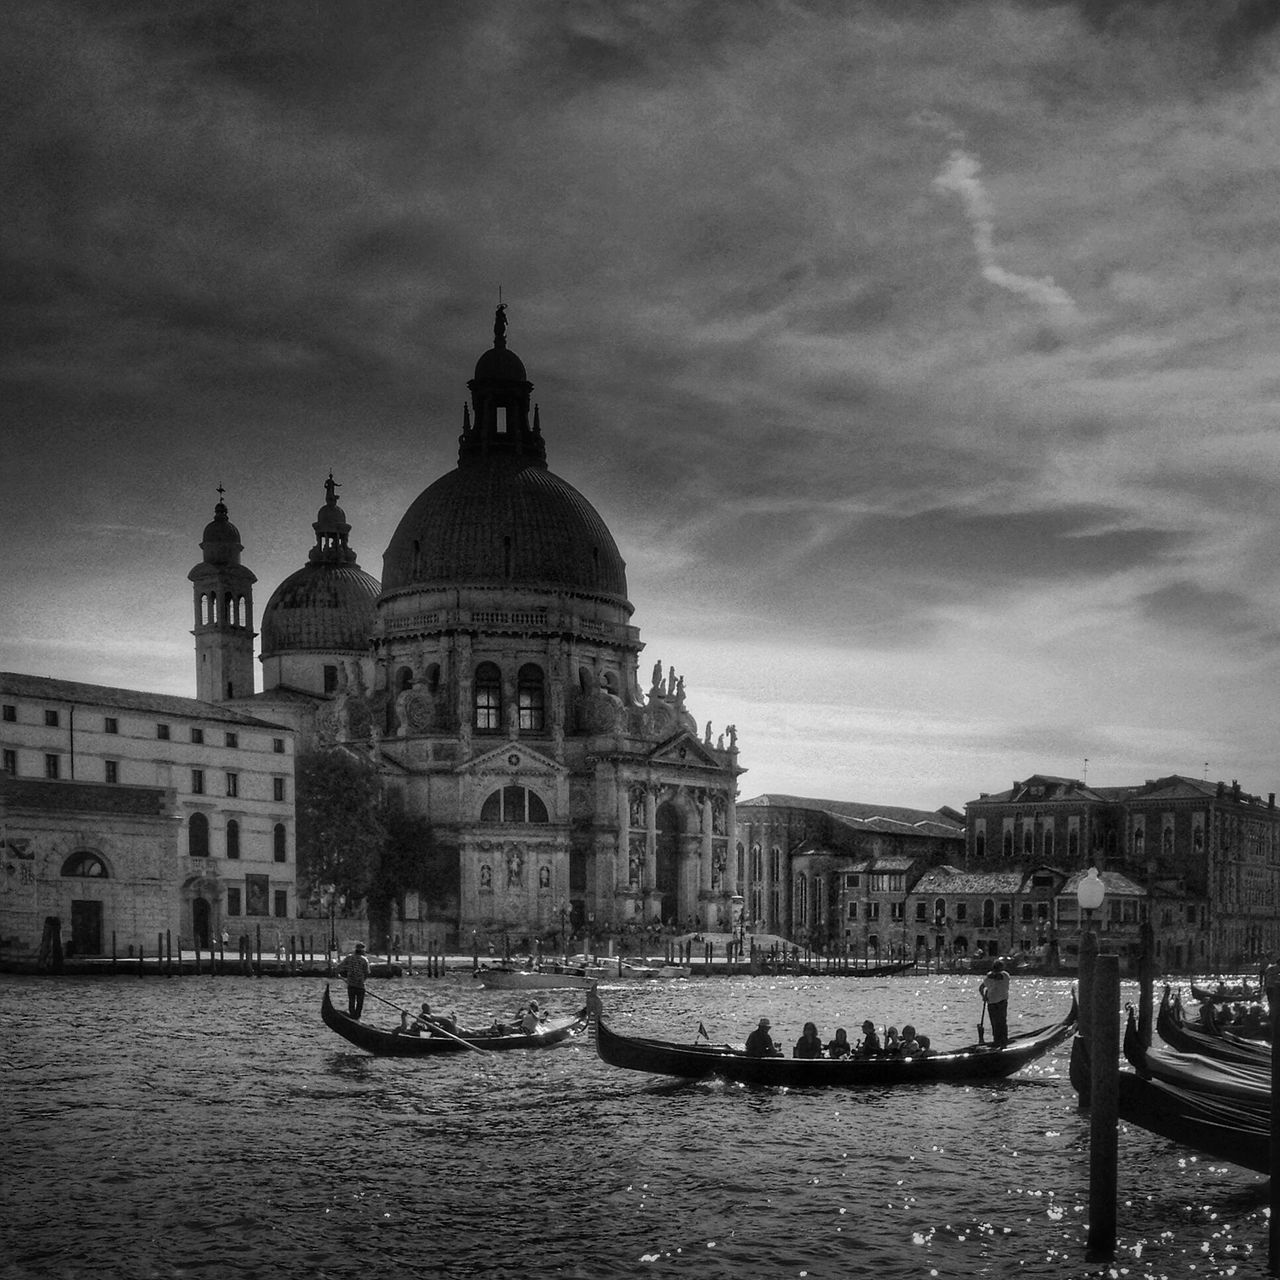 architecture, building exterior, built structure, water, nautical vessel, waterfront, sky, transportation, church, river, mode of transport, religion, dome, place of worship, city, boat, cloud - sky, spirituality